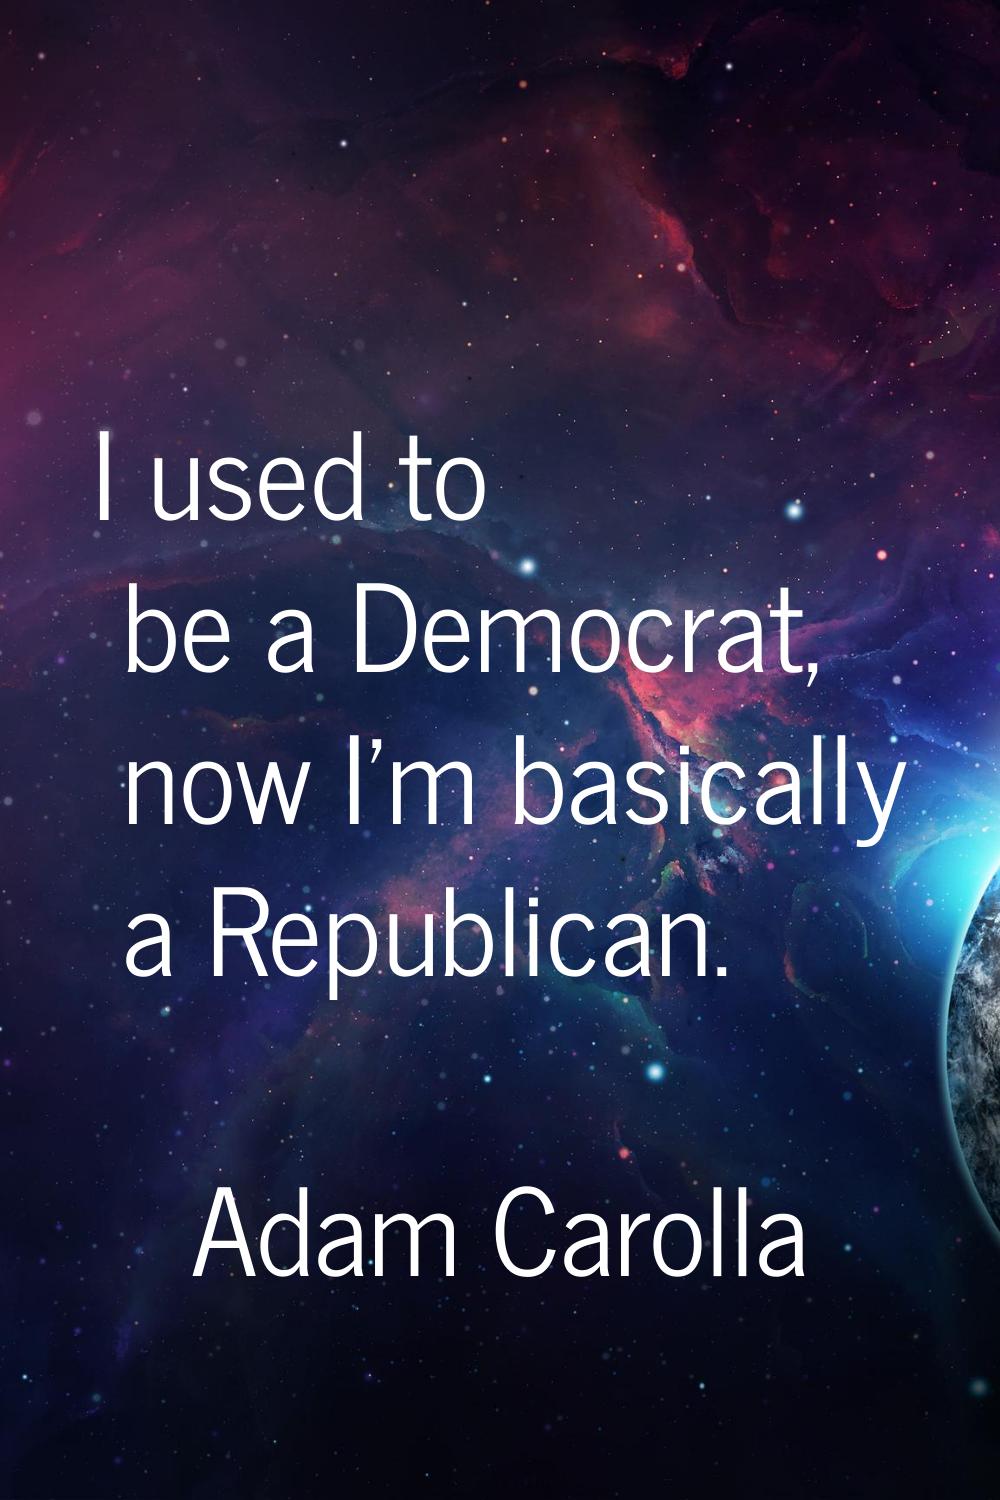 I used to be a Democrat, now I'm basically a Republican.